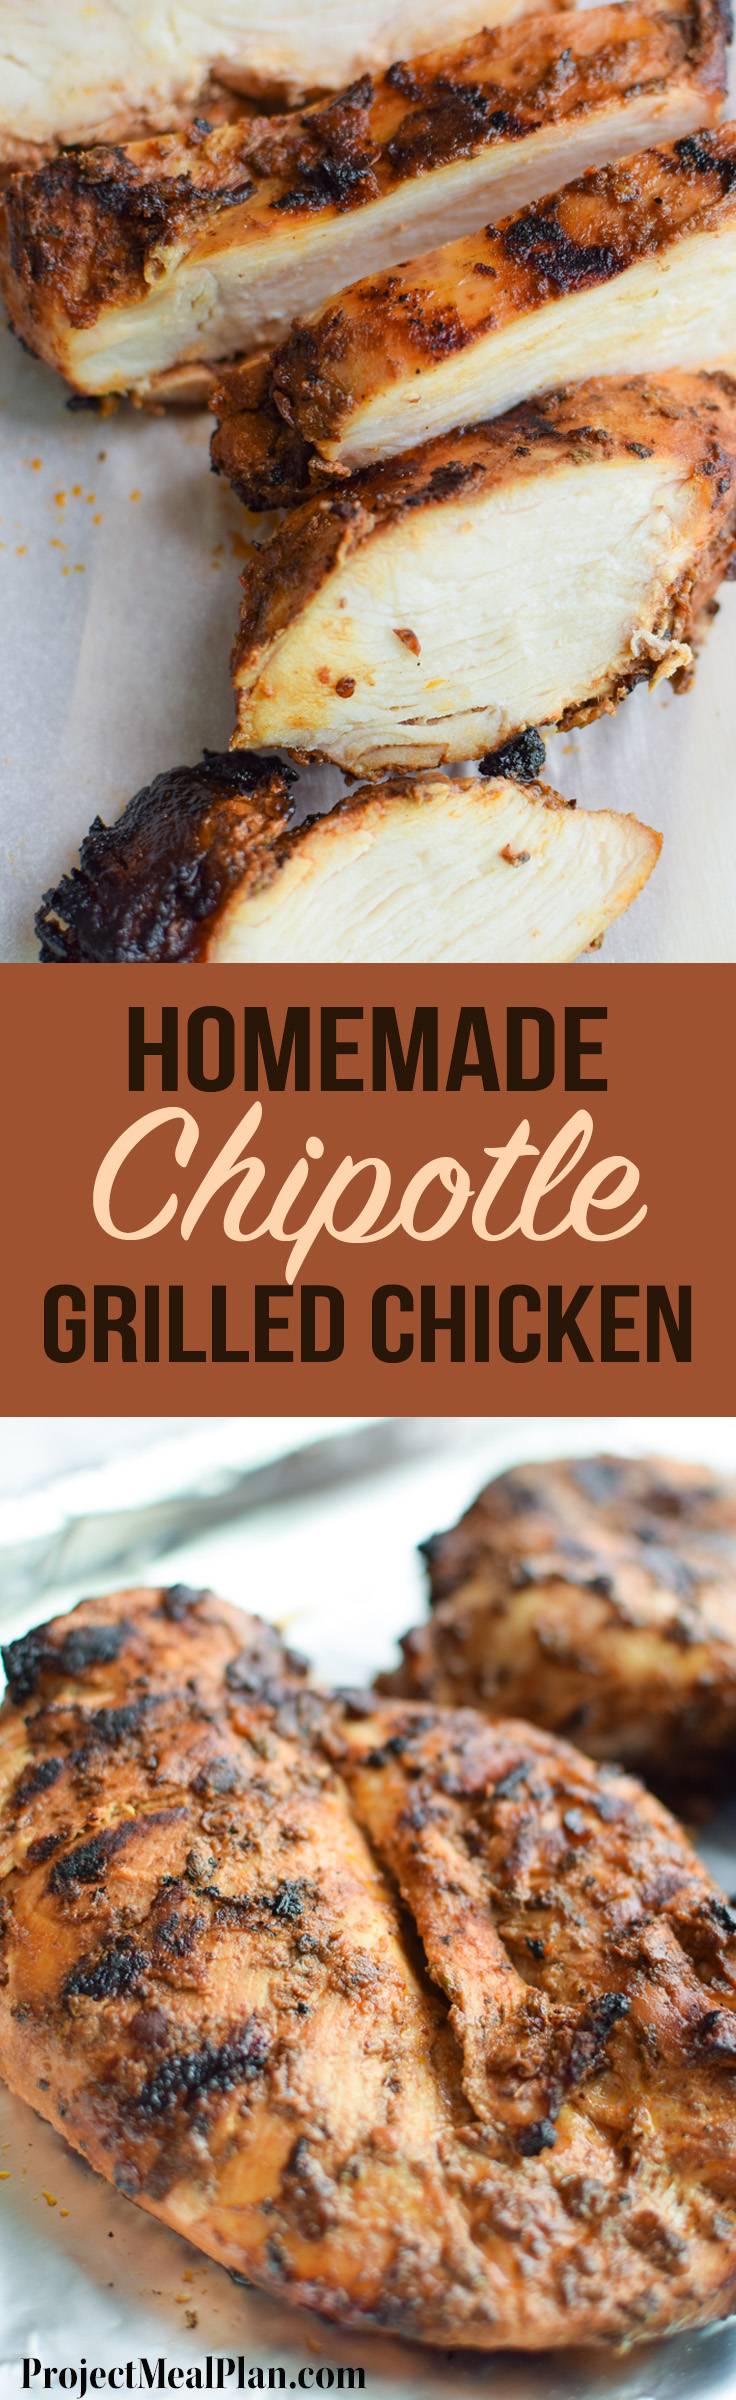 Homemade Chipotle Grilled Chicken recipe, super easy to make in large batches for that Chipotle restaurant taste at home! - ProjectMealPlan.com